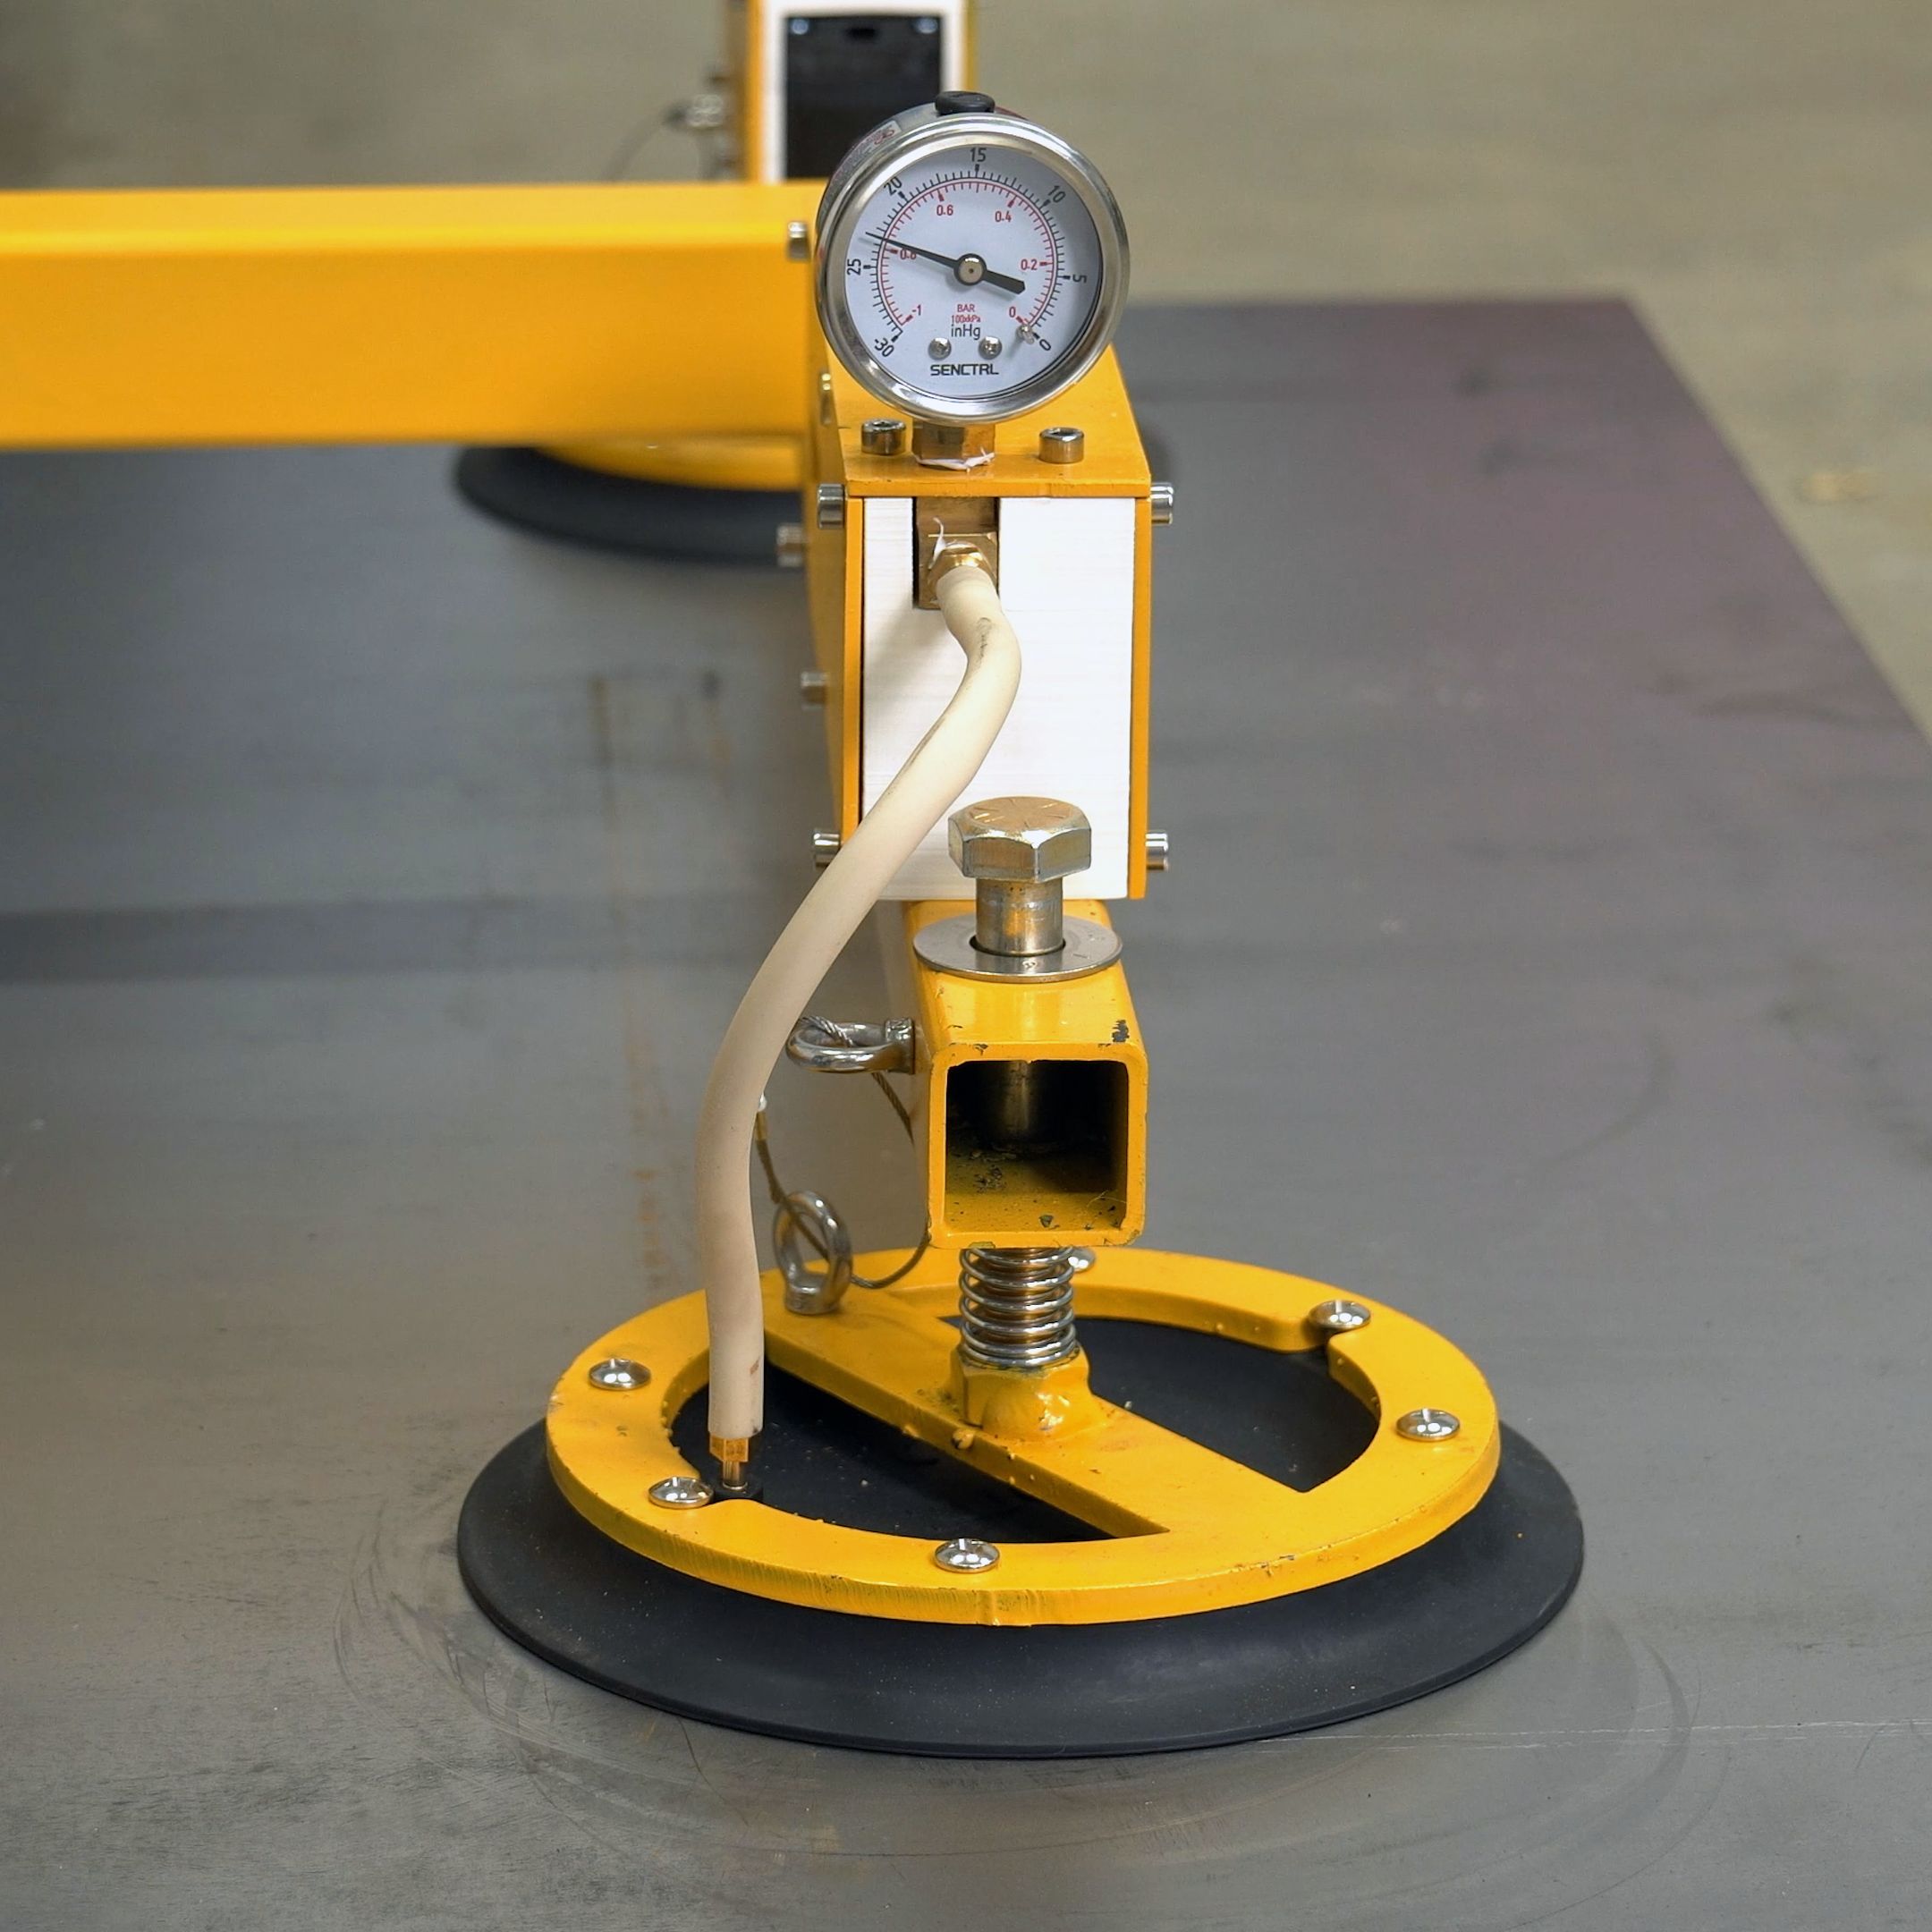 Vacuum lifter suction cup adhering to metal, which is confirmed by a vacuum gauge